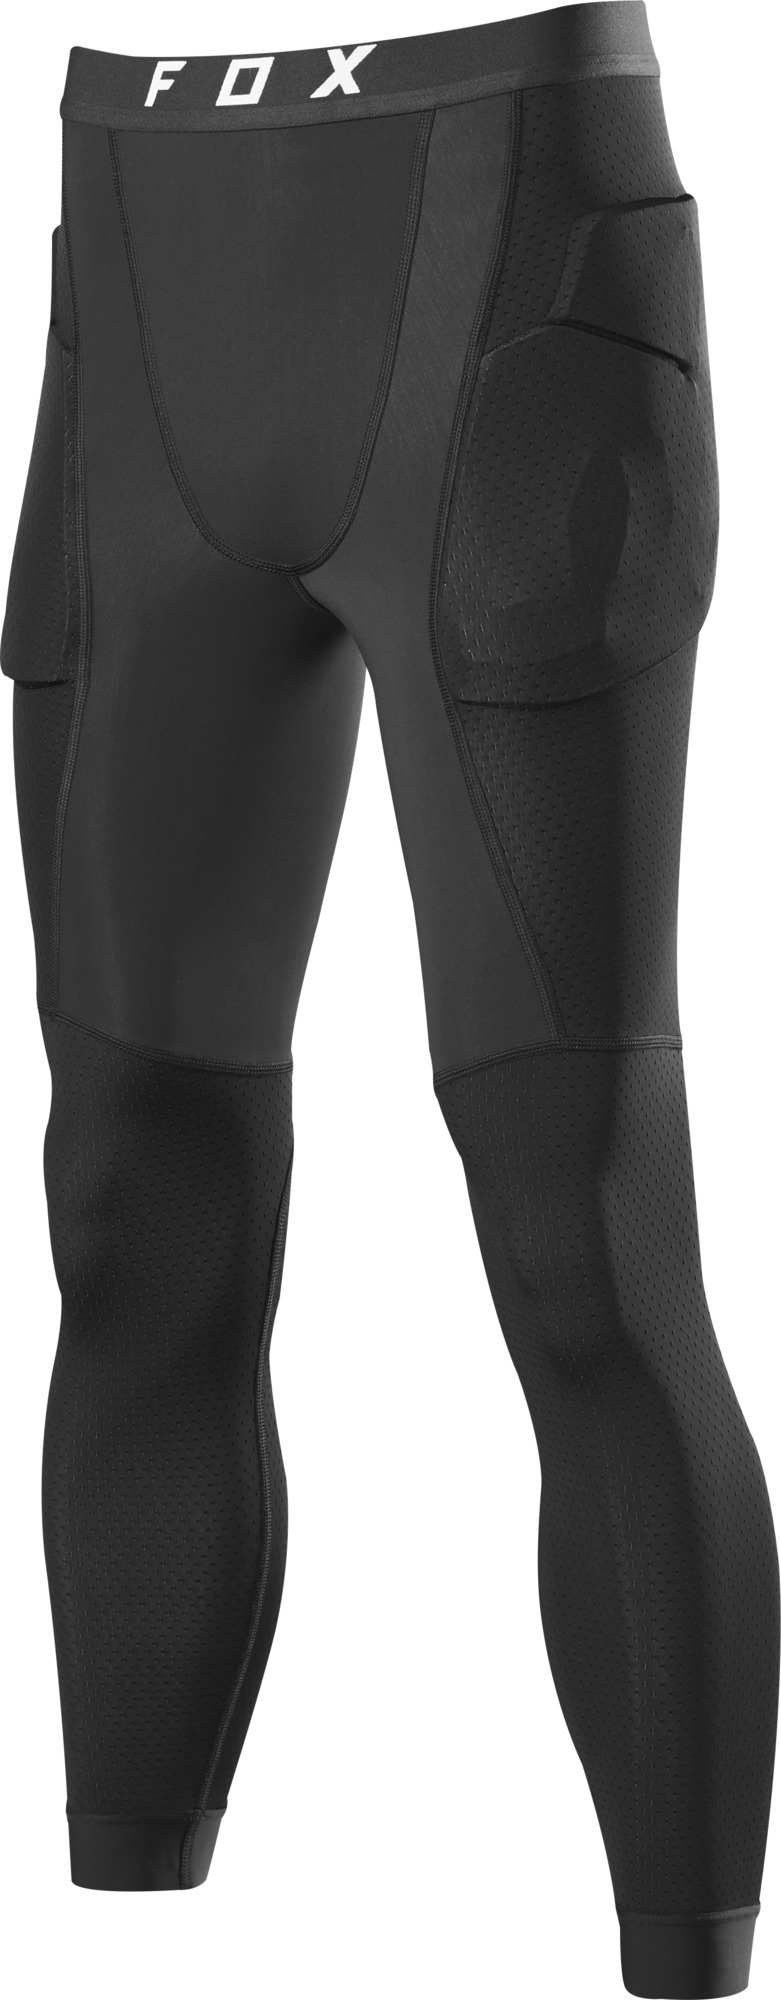 fox racing dirt bike under protection protections for men baseframe pro pant